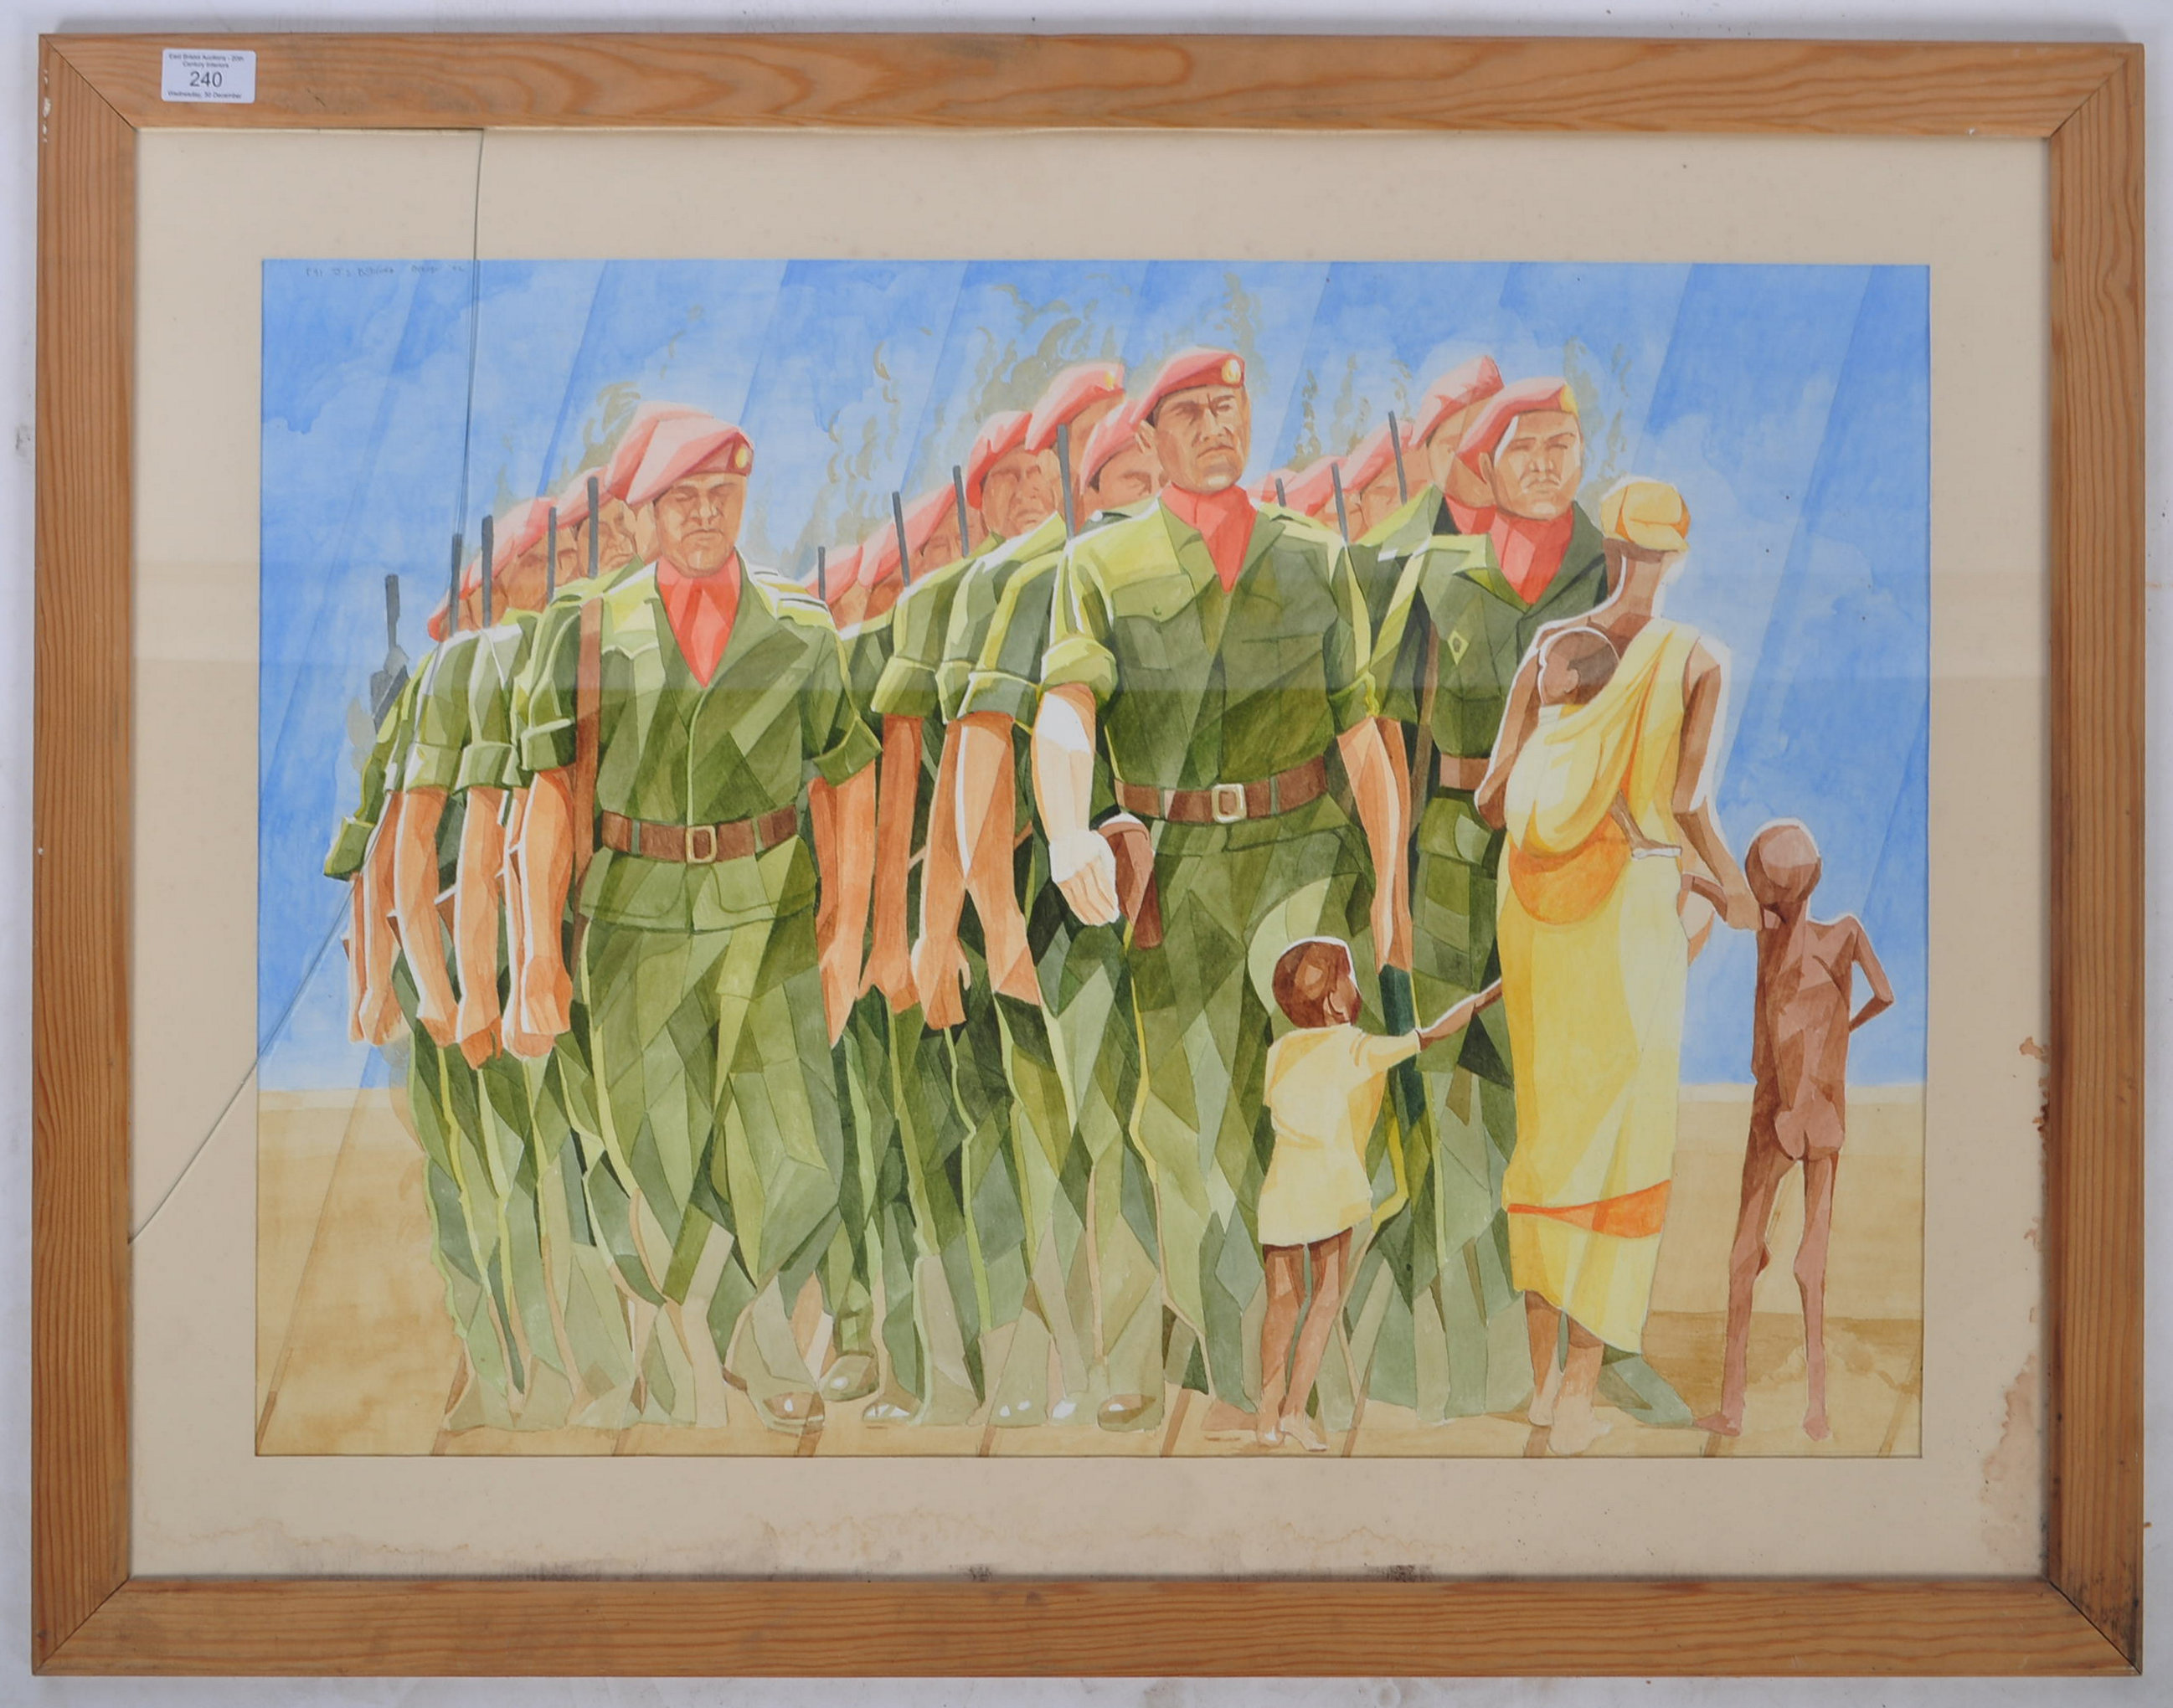 JS BEDFORD - ONWARD CHRISTIAN SOLDIERS - WATERCOLOUR PAINTING